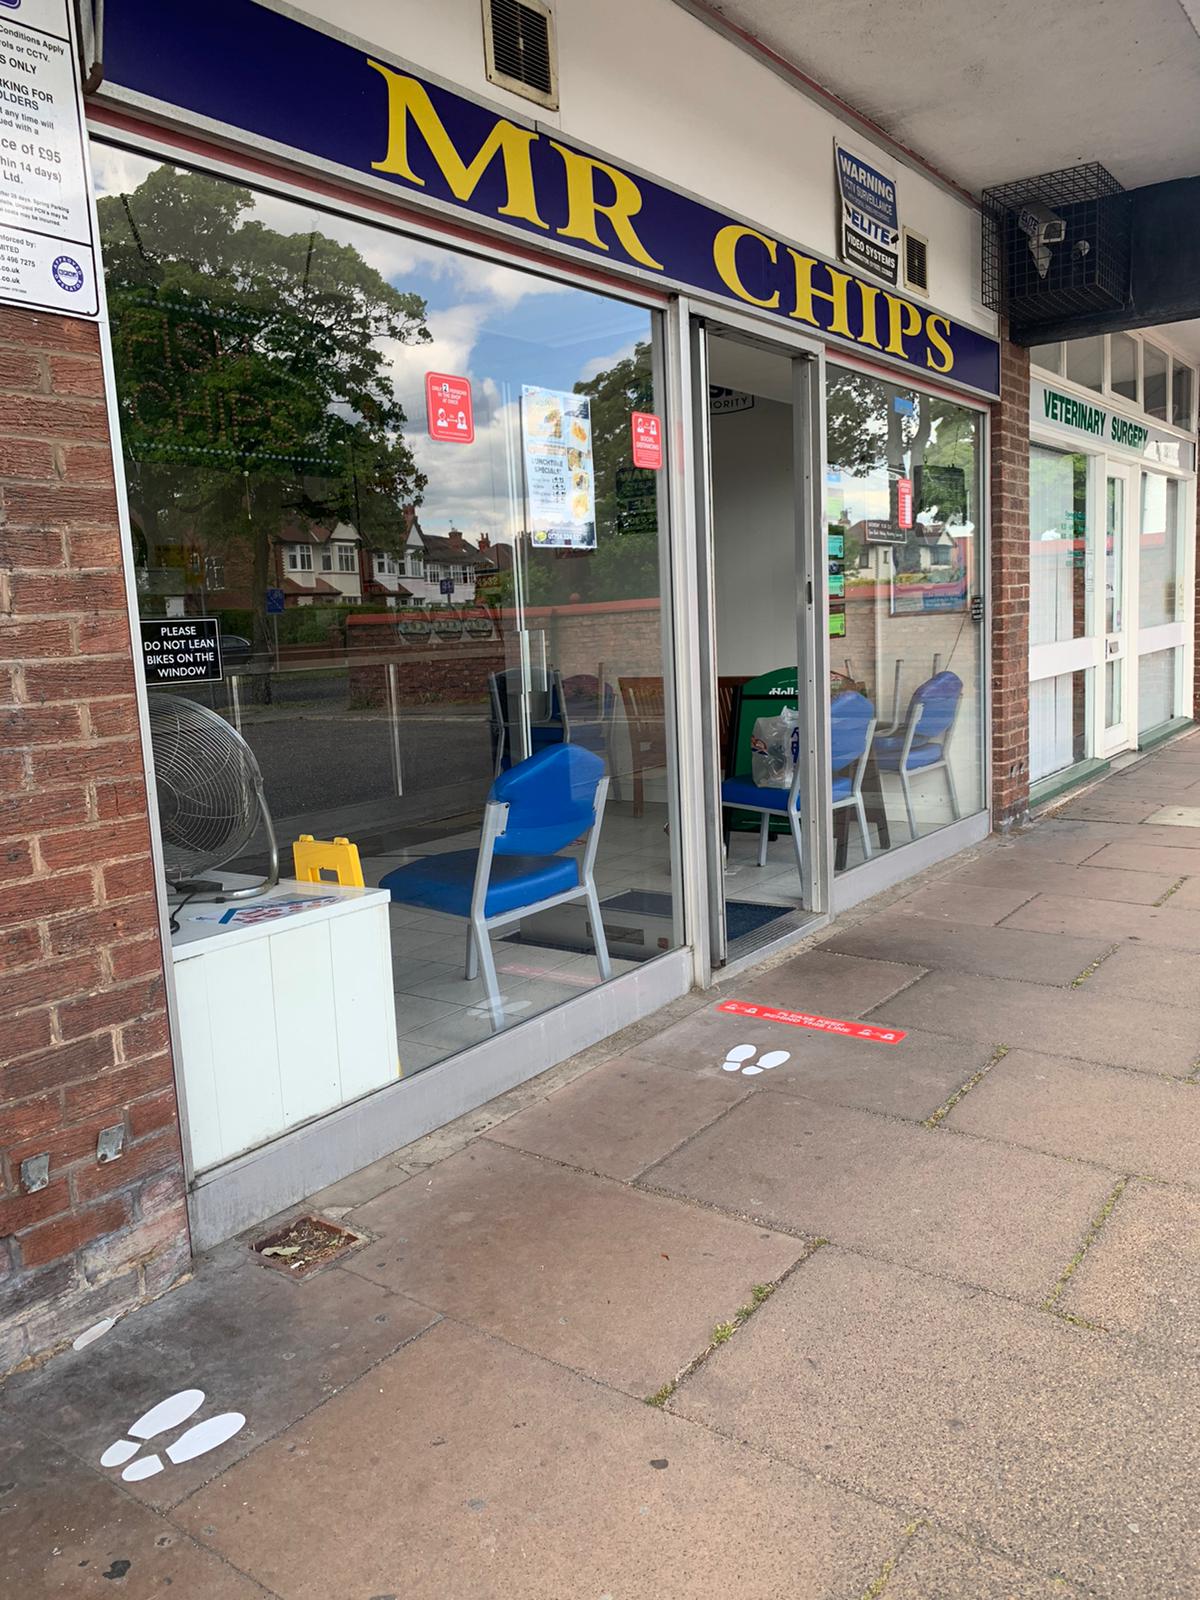 New social distancing signs created by Southport firm Magnetic Activation outside Mr Chips chippy in Churchtown in Southport